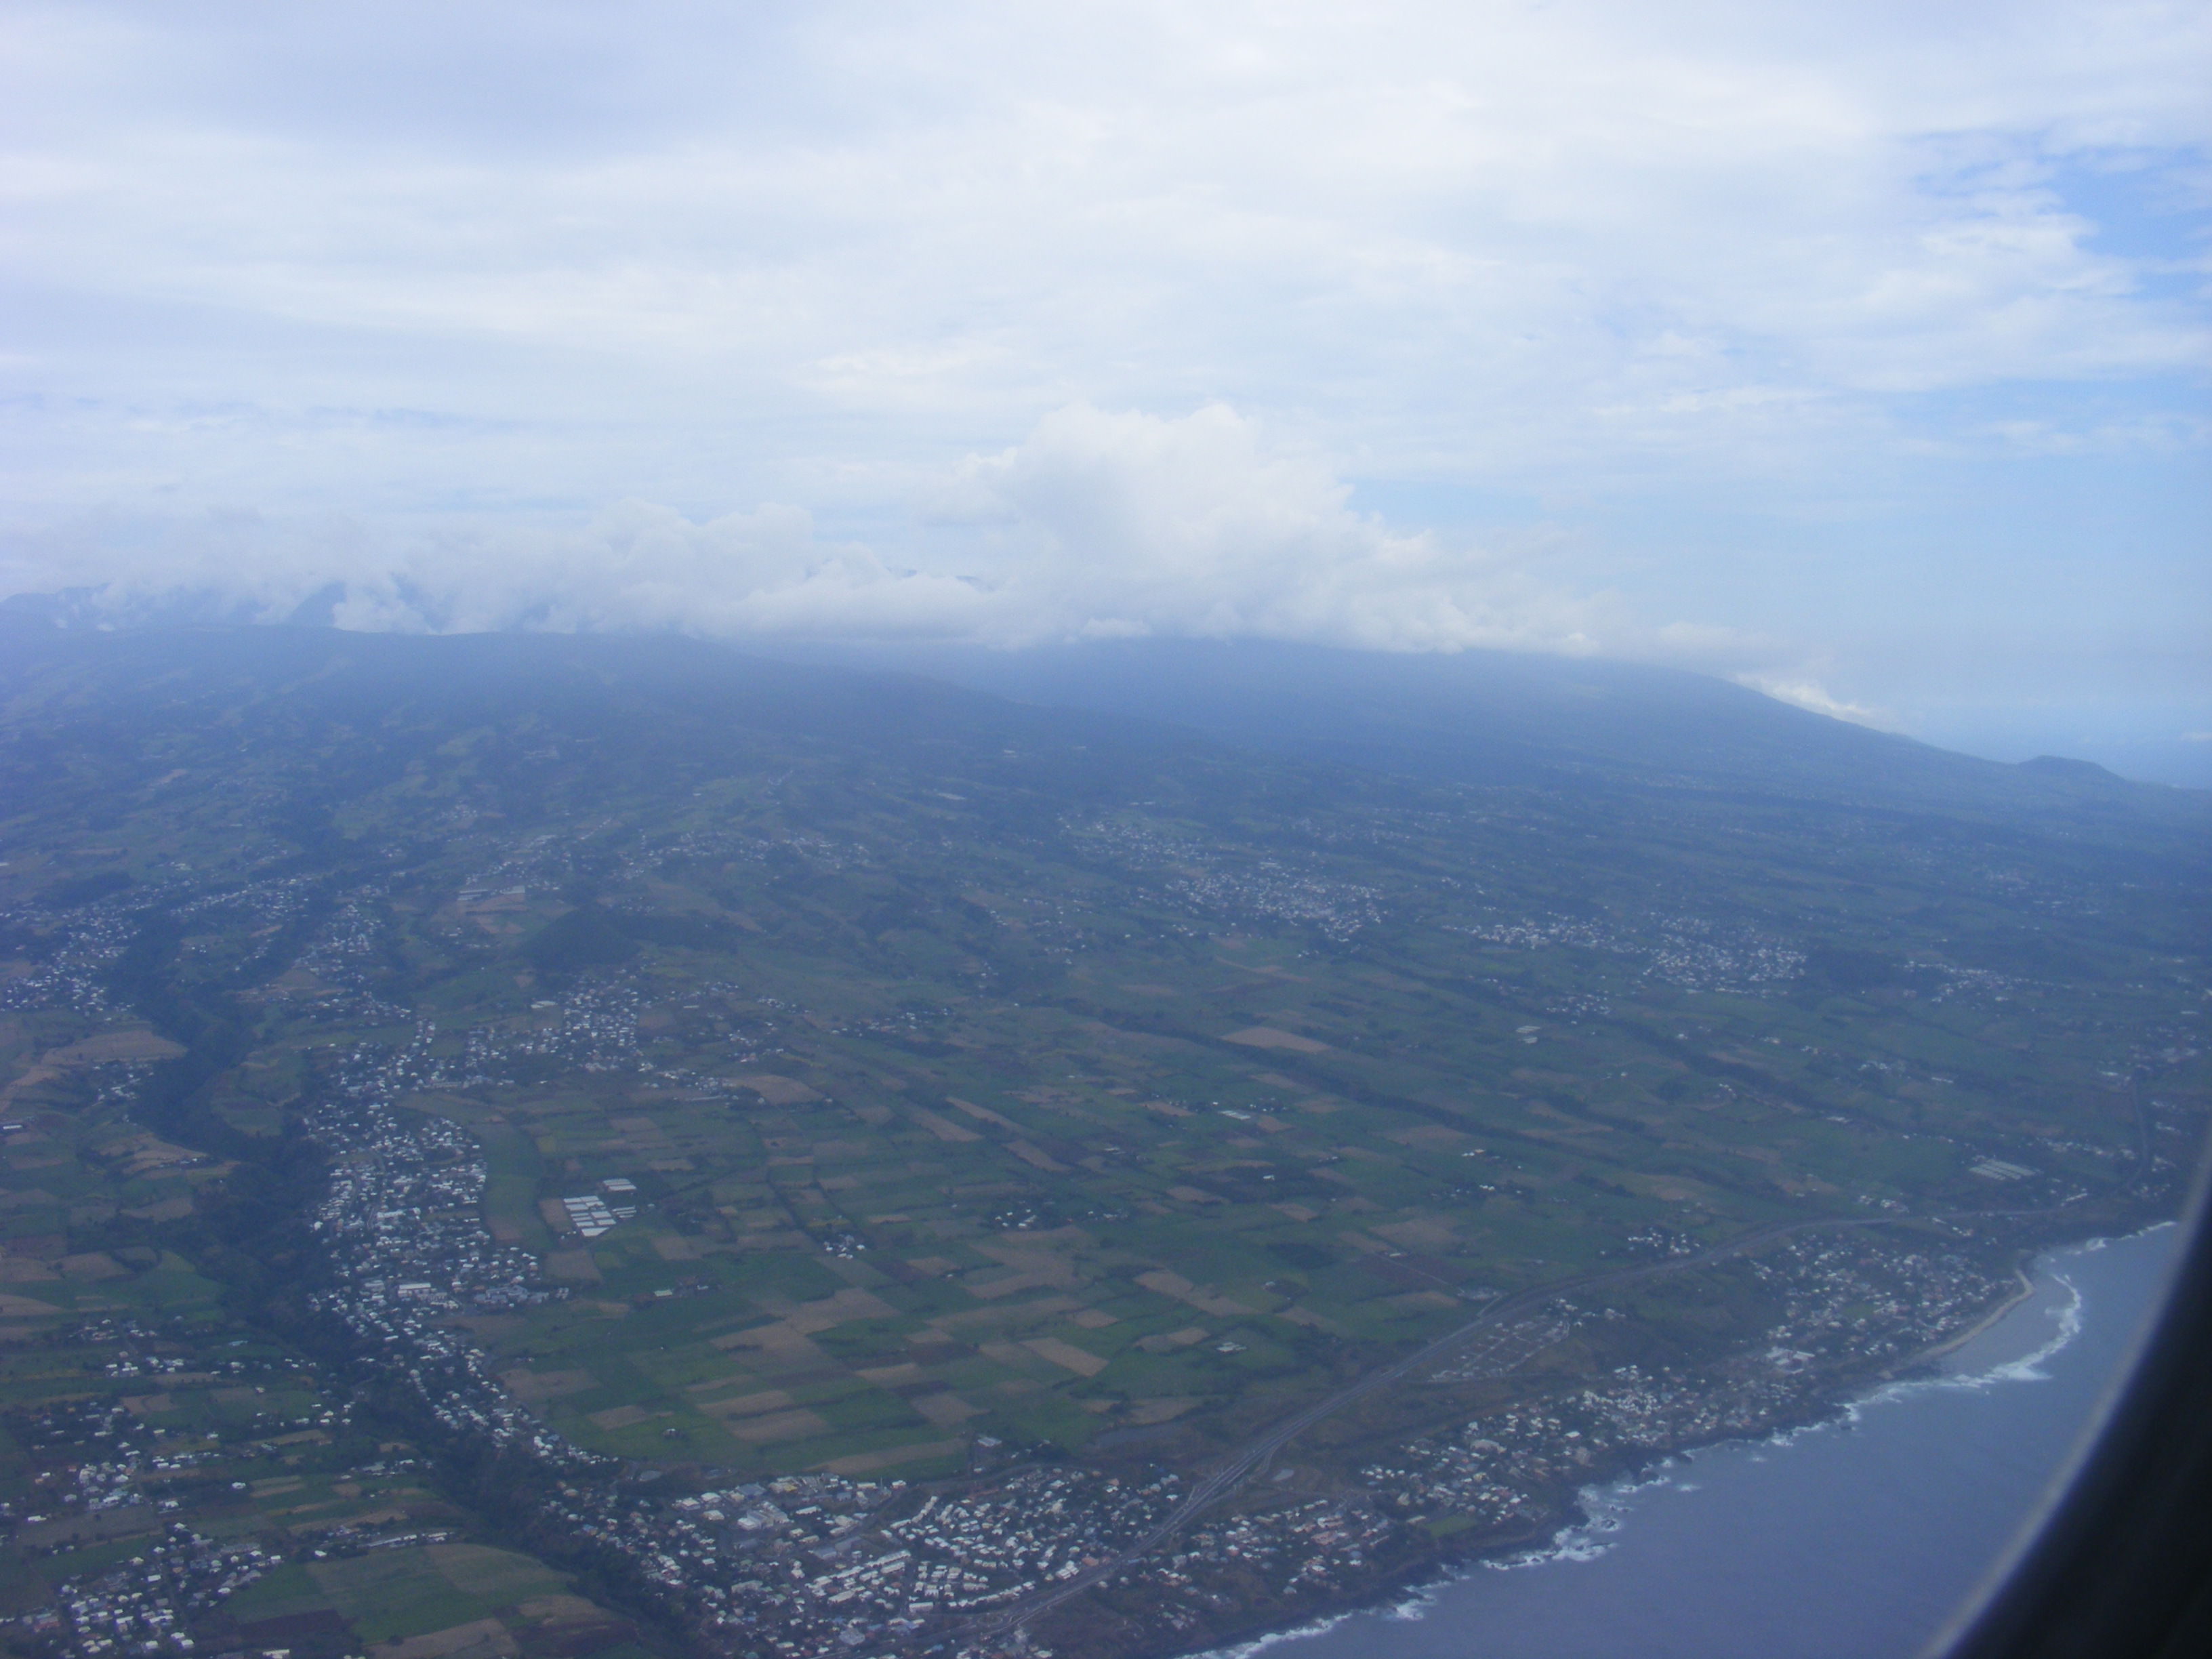 my first glimpse of Reunion Island